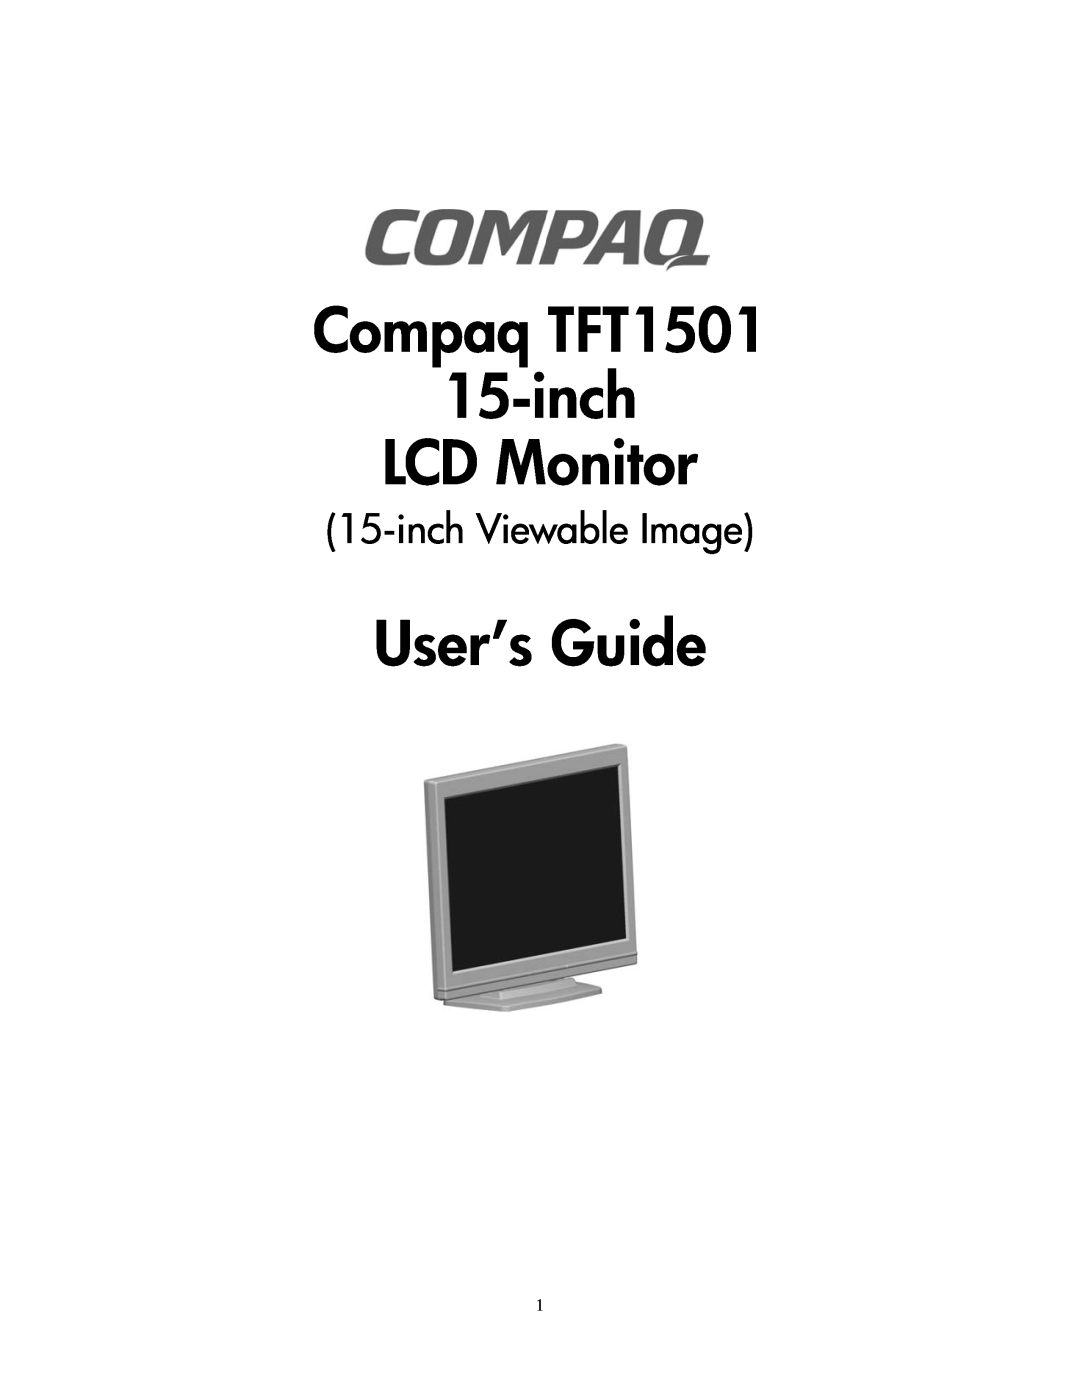 Compaq manual inch Viewable Image, Compaq TFT1501 15-inch LCD Monitor, User’s Guide 